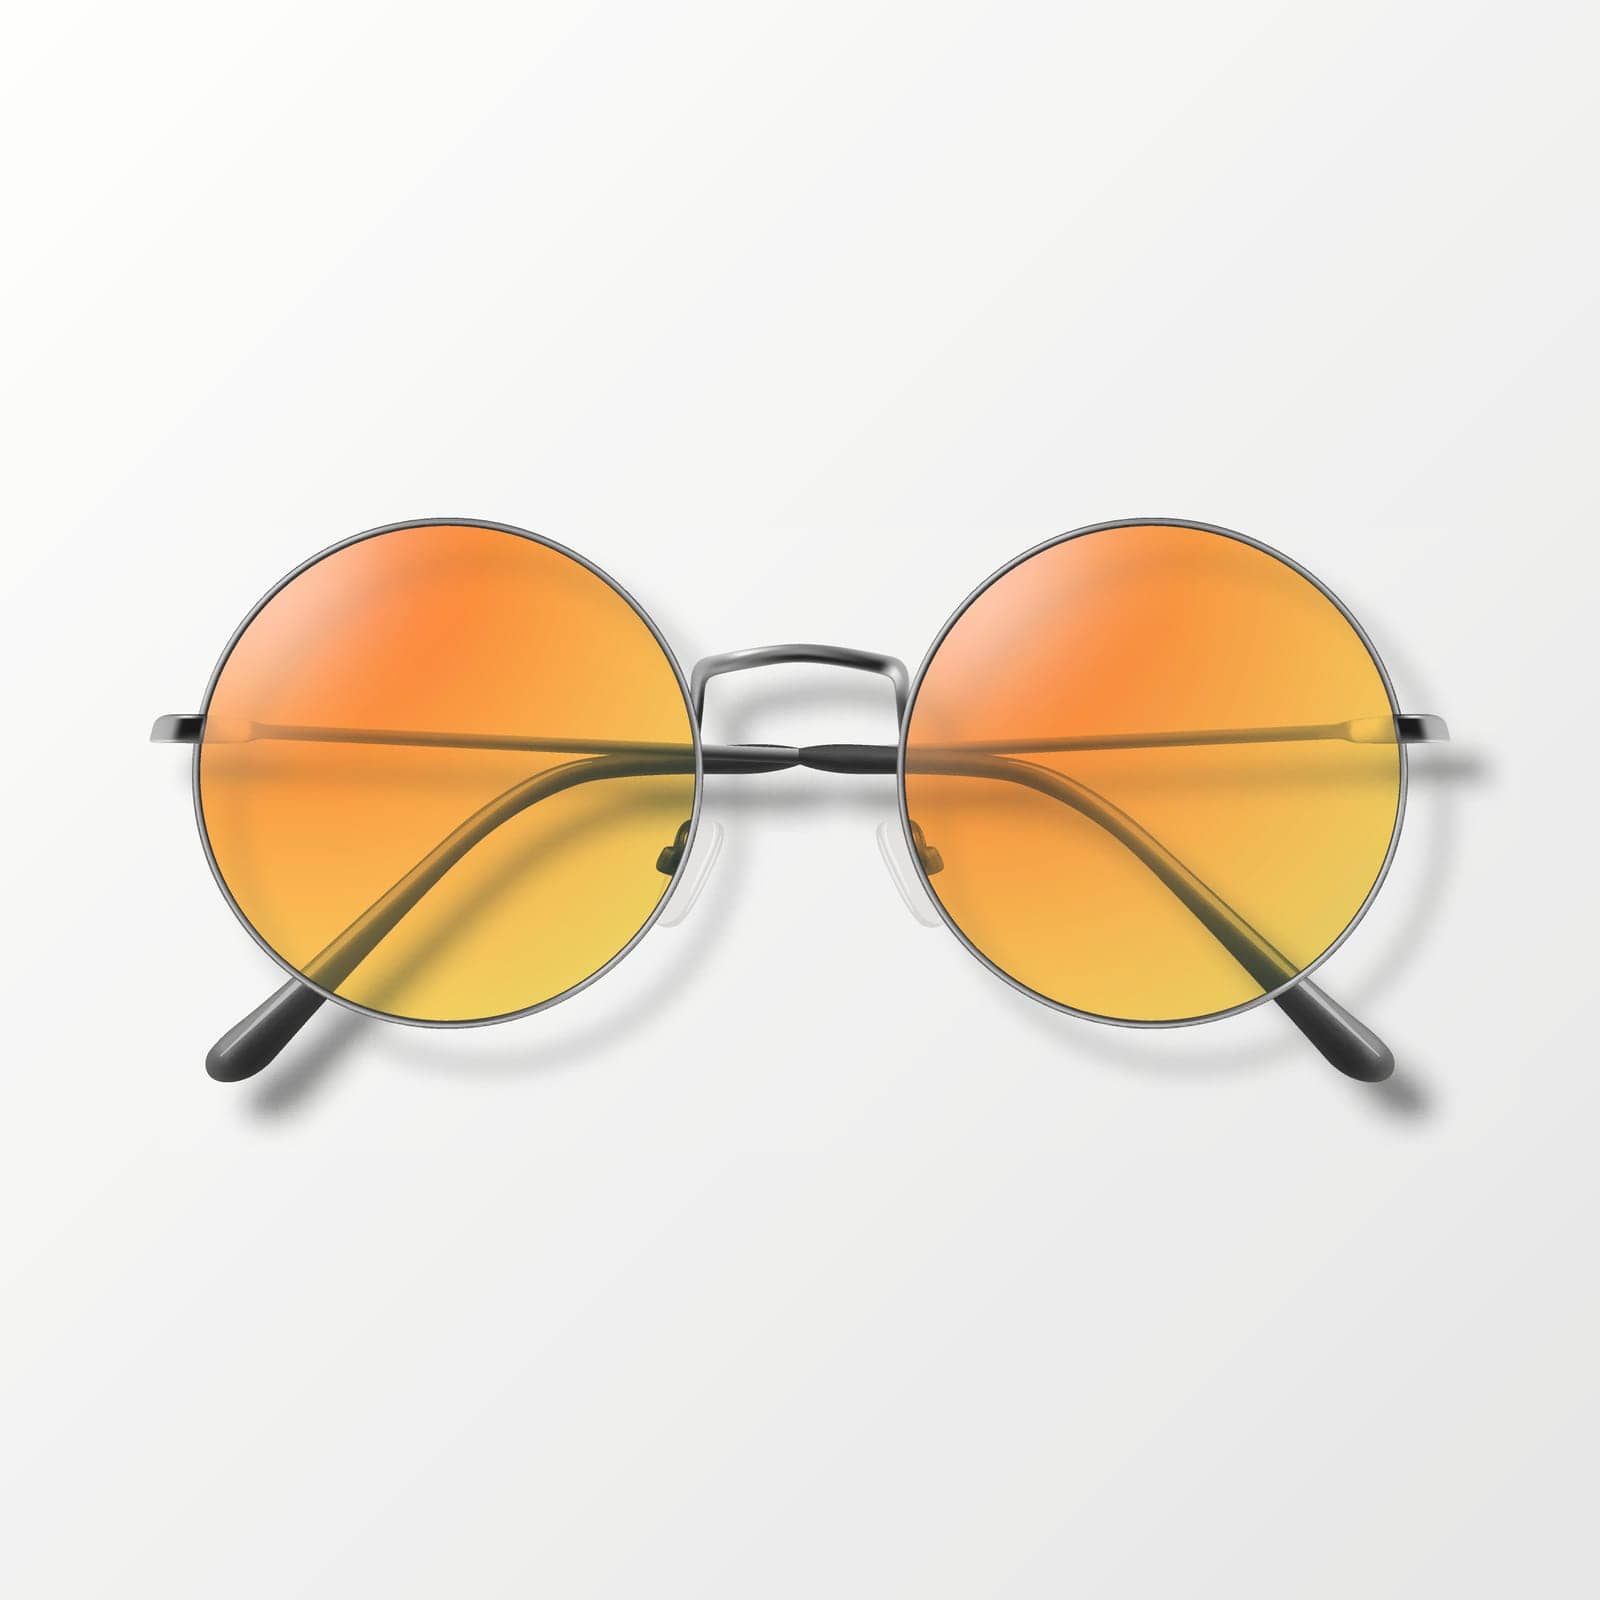 Vector 3d Realistic Orange Round Frame Glasses Isolated. Sunglasses, Lens, Vintage Eyeglasses in Top View. Design Template for Optics and Eyewear Branding Concept by Gomolach